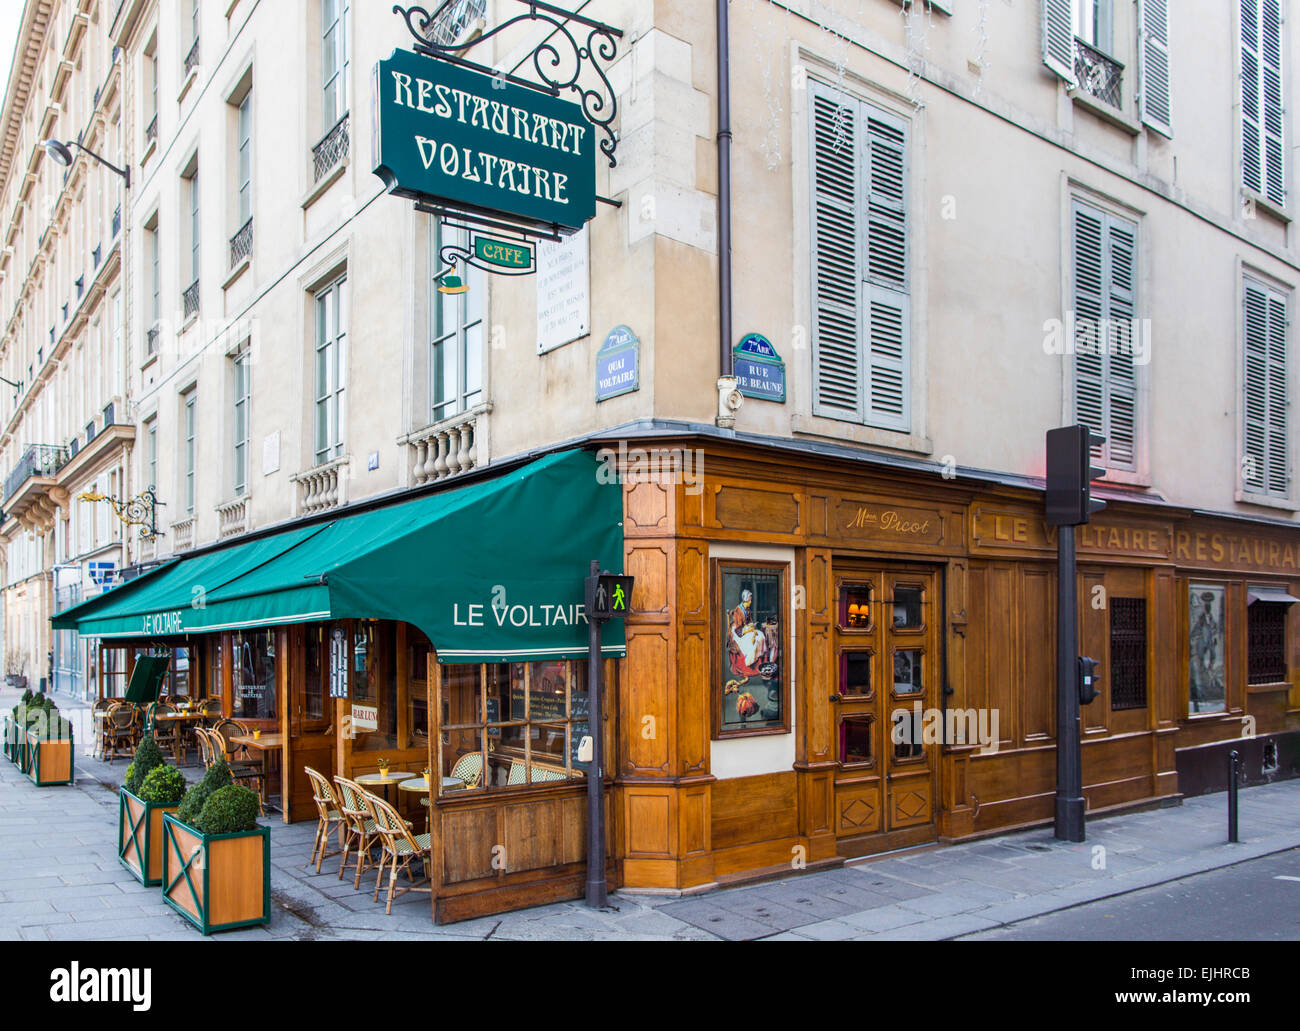 Outdoor cafe restaurant Le Voltaire in Paris, France Stock Photo